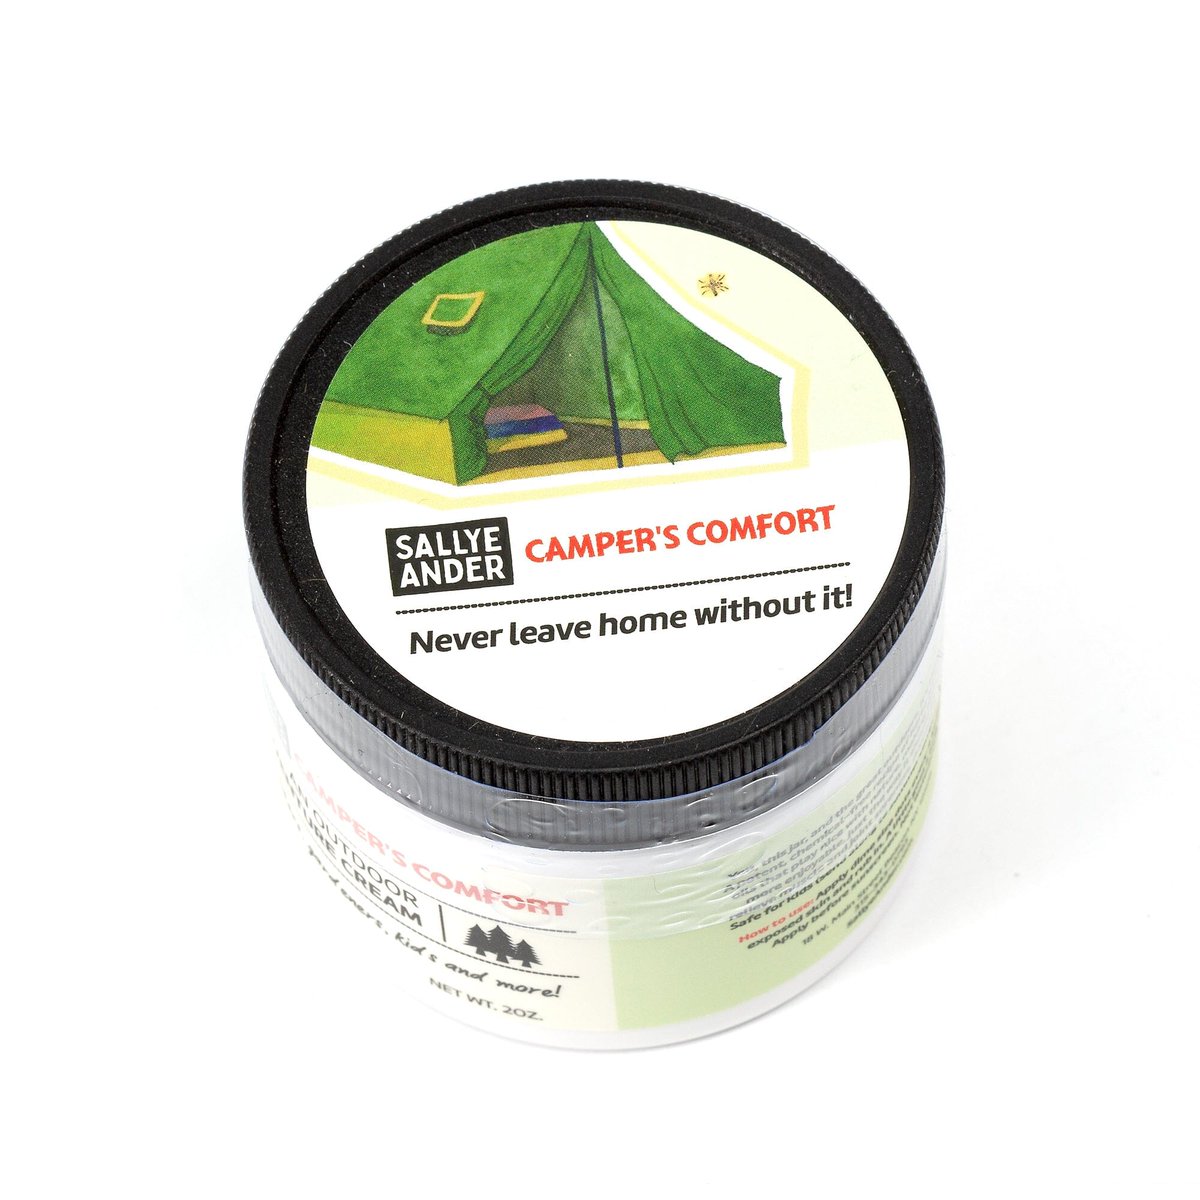 Heading outdoors this long weekend? Bring SallyeAnder Camper's Comfort Outdoor Cream with you!!

Available here: ow.ly/890650RAGcV

#skincare #camping #outdoors #natural #madeintheUSA #Fendrihan